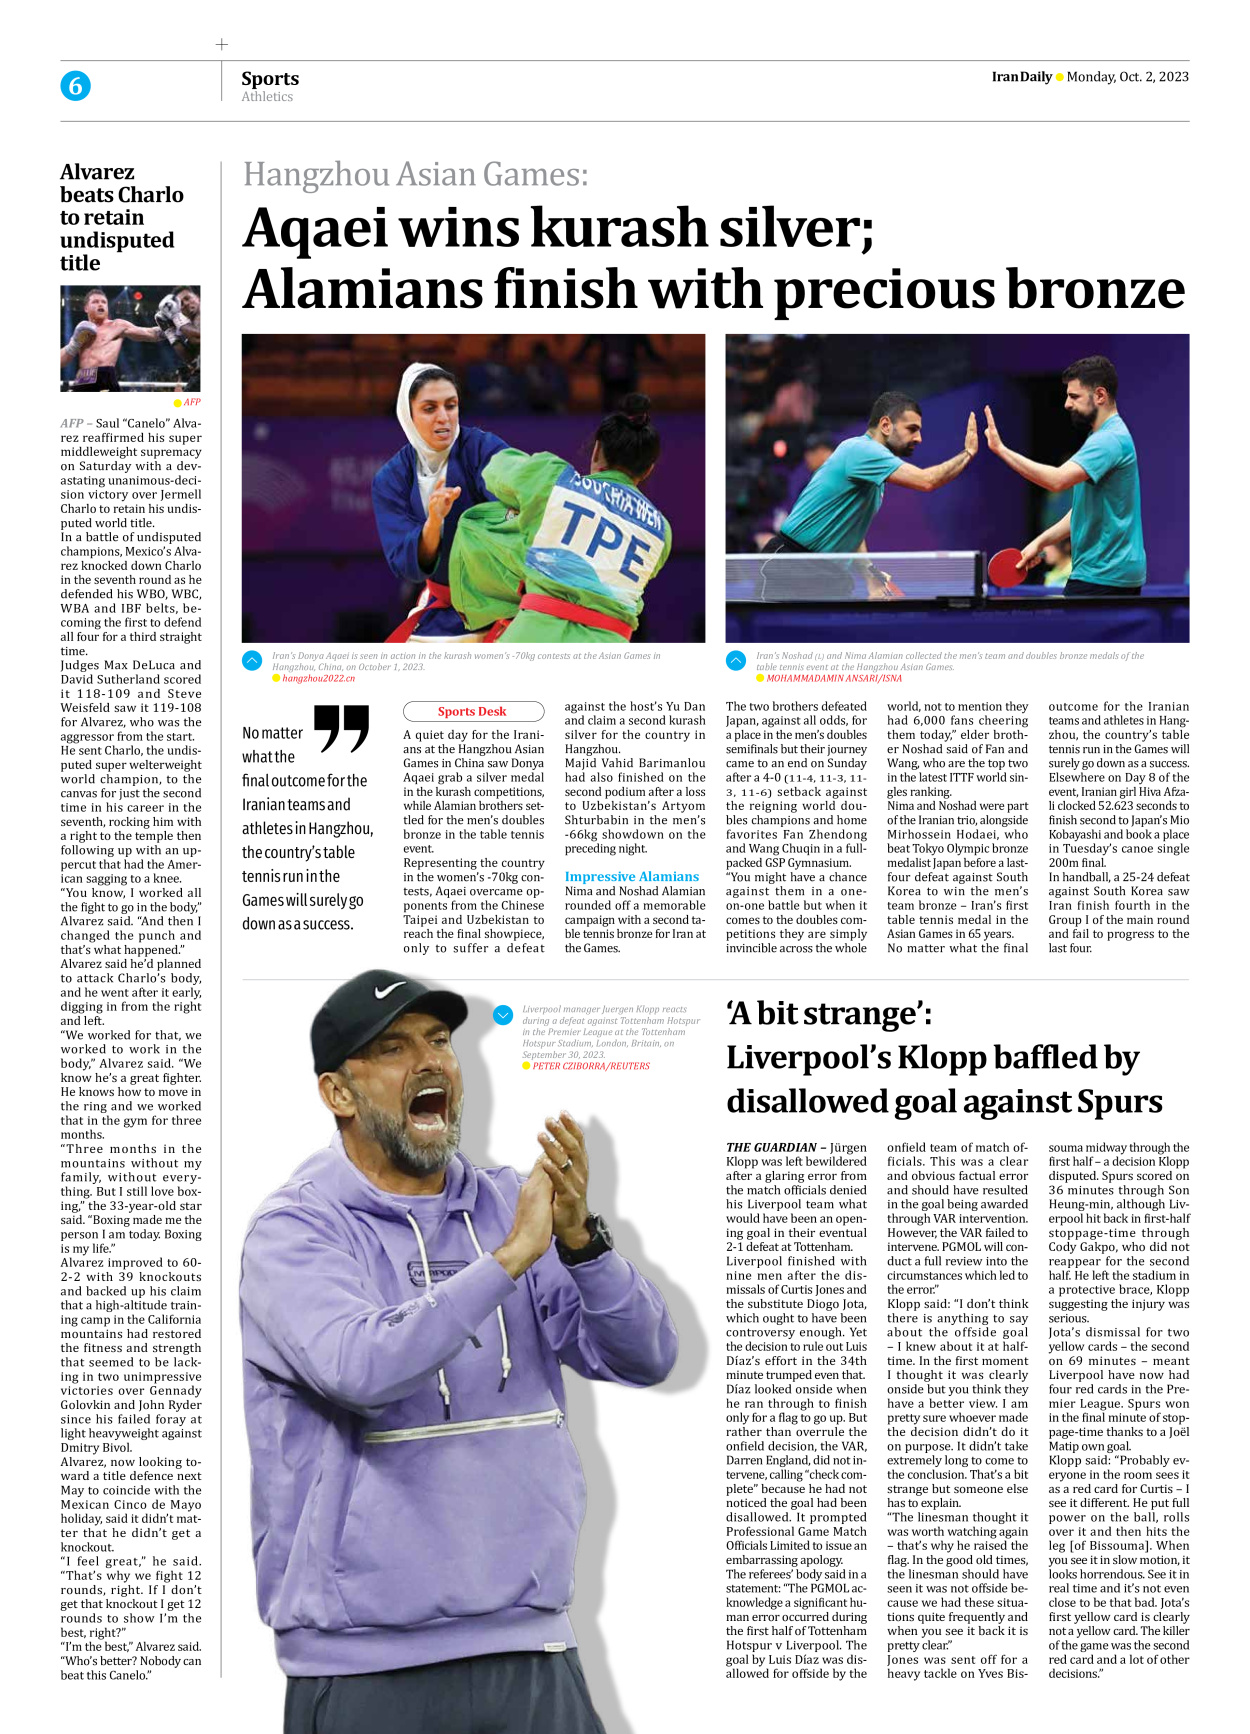 Iran Daily - Number Seven Thousand Three Hundred and Ninety Eight - 02 October 2023 - Page 6